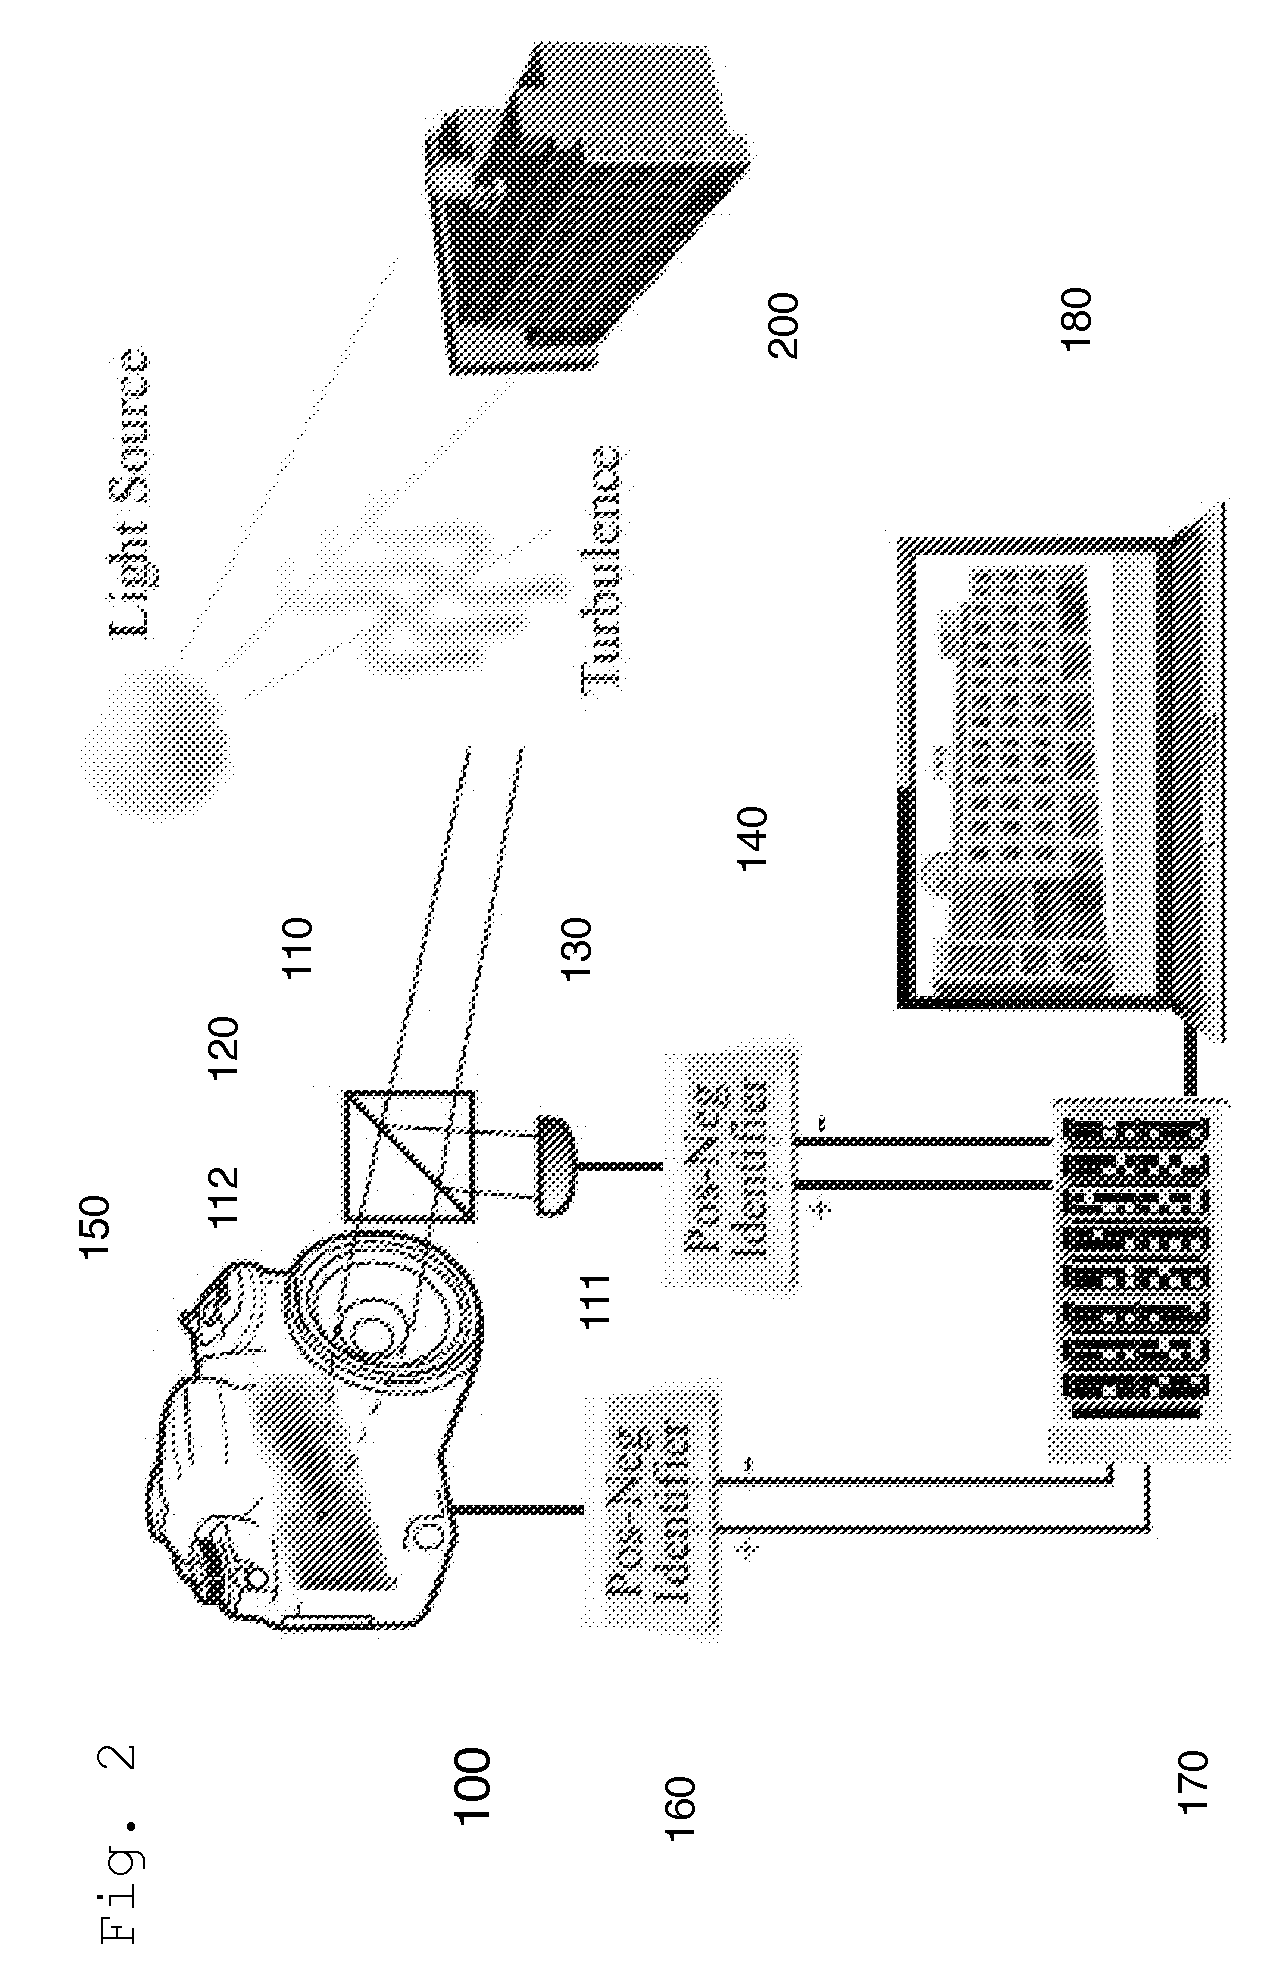 Turbulence-free camera system and related method of image enhancement